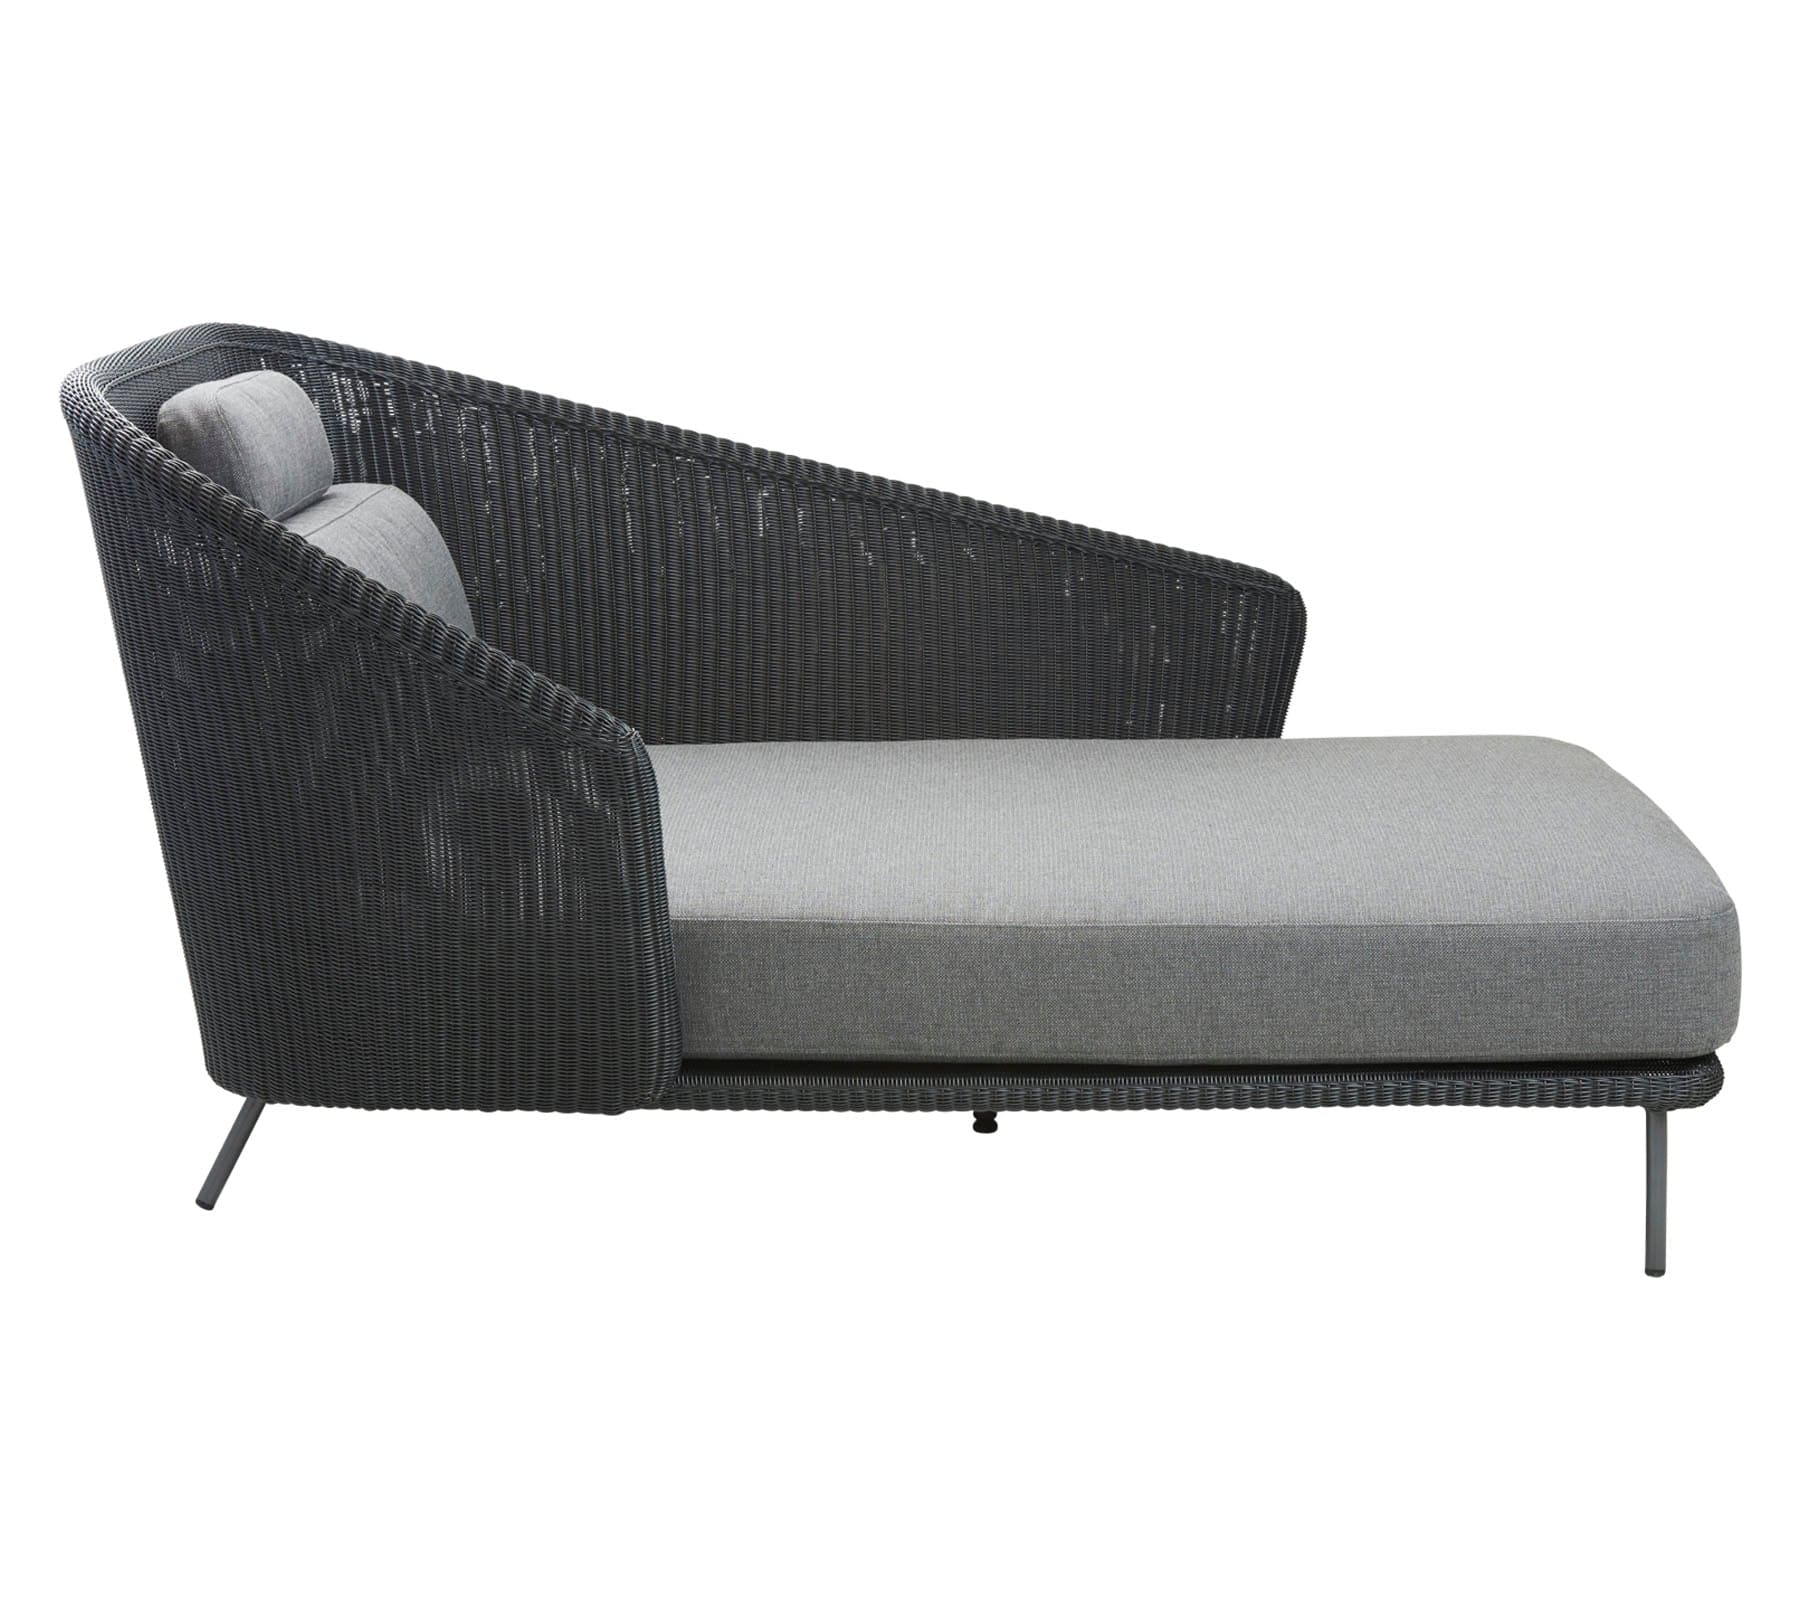 Boxhill's Mega Modern Outdoor Right Module Daybed side view in white background